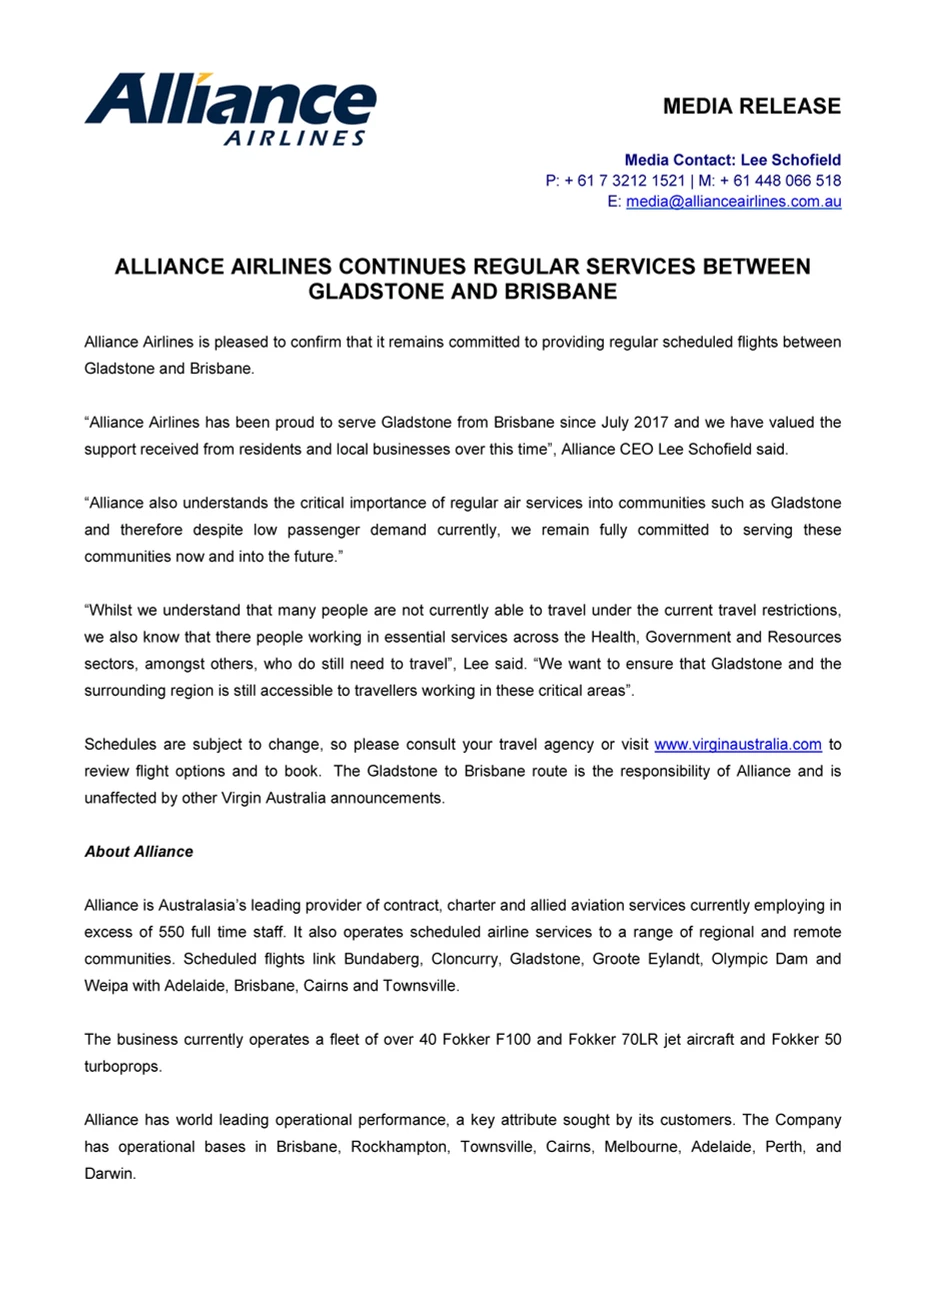 Alliance Airlines Continues Regular Services Between Gladstone And Brisbane